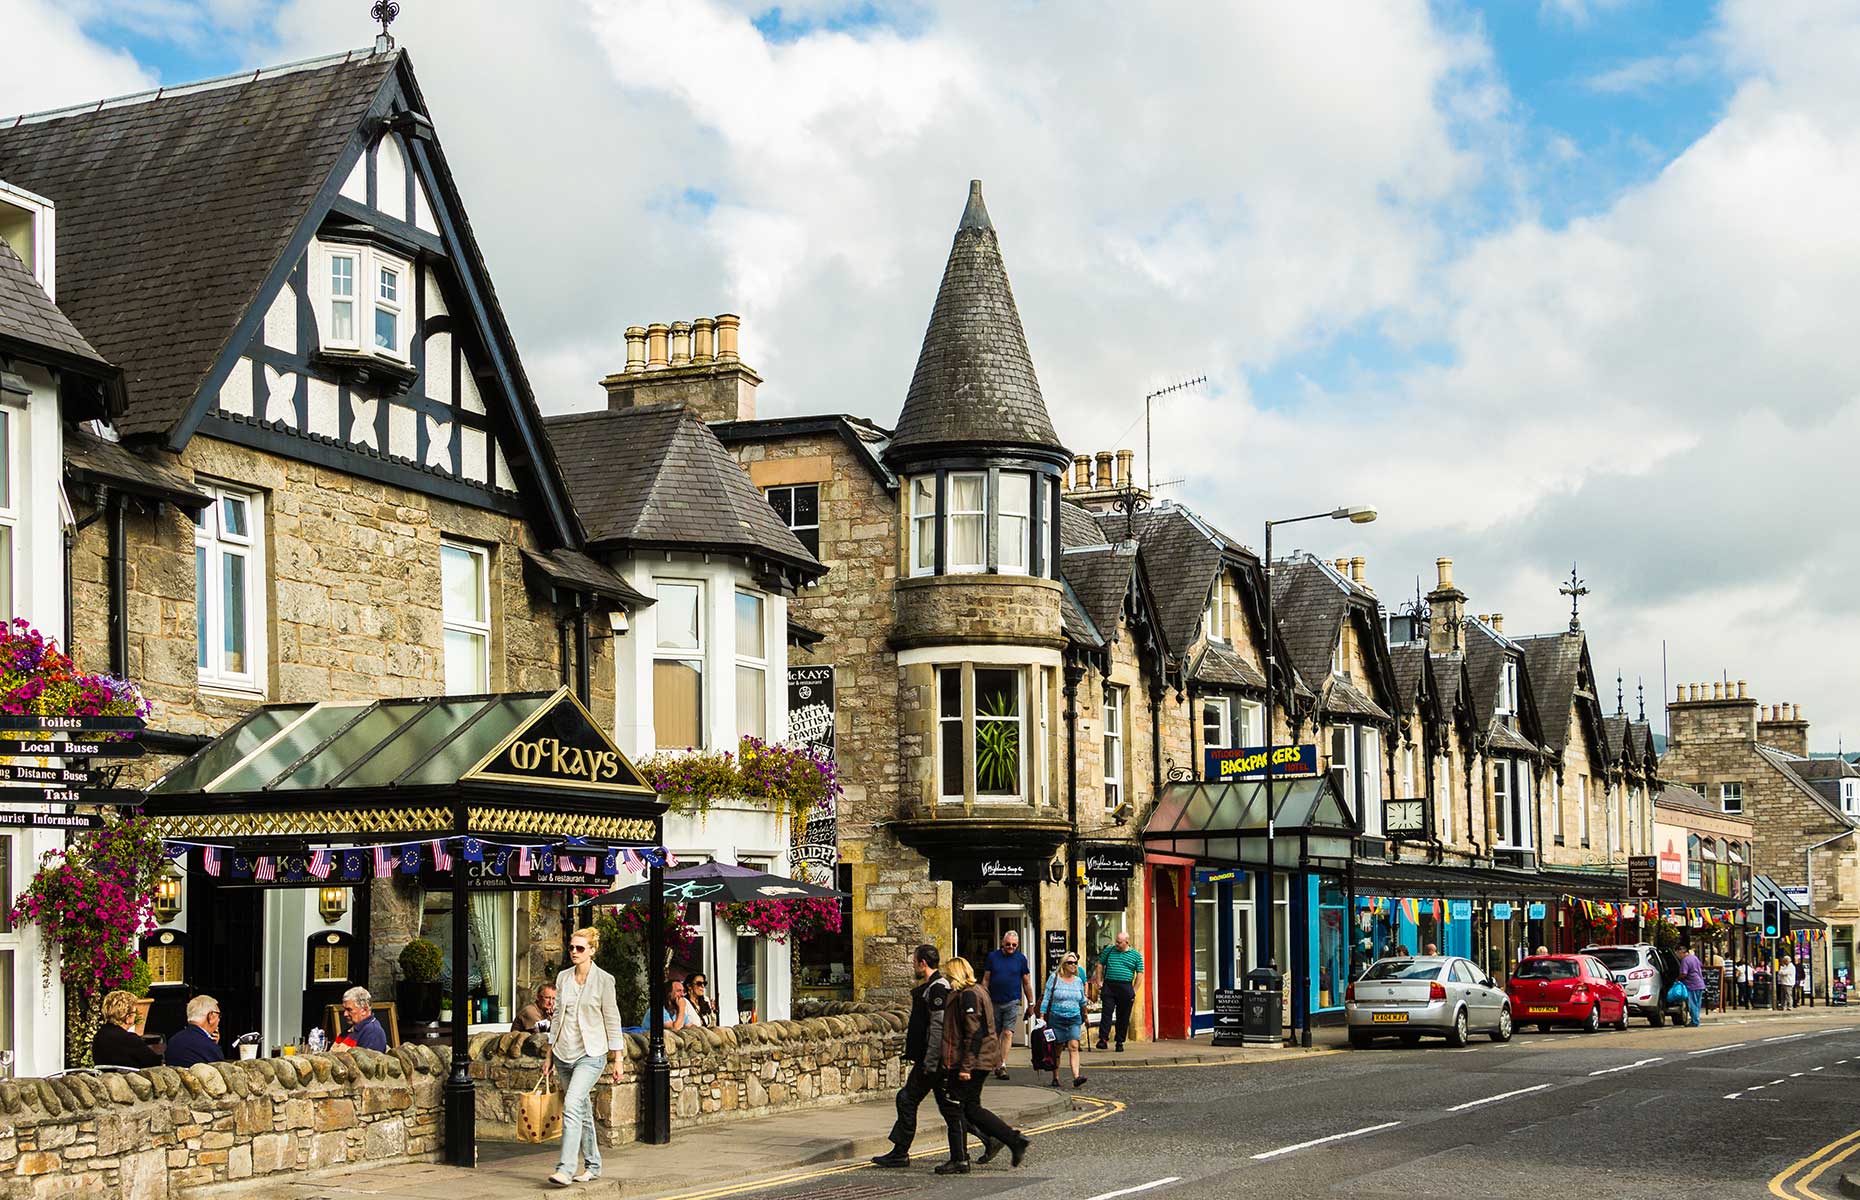 Pitlochry in Perthshire Scotland (Image: lowsun/Shutterstock)